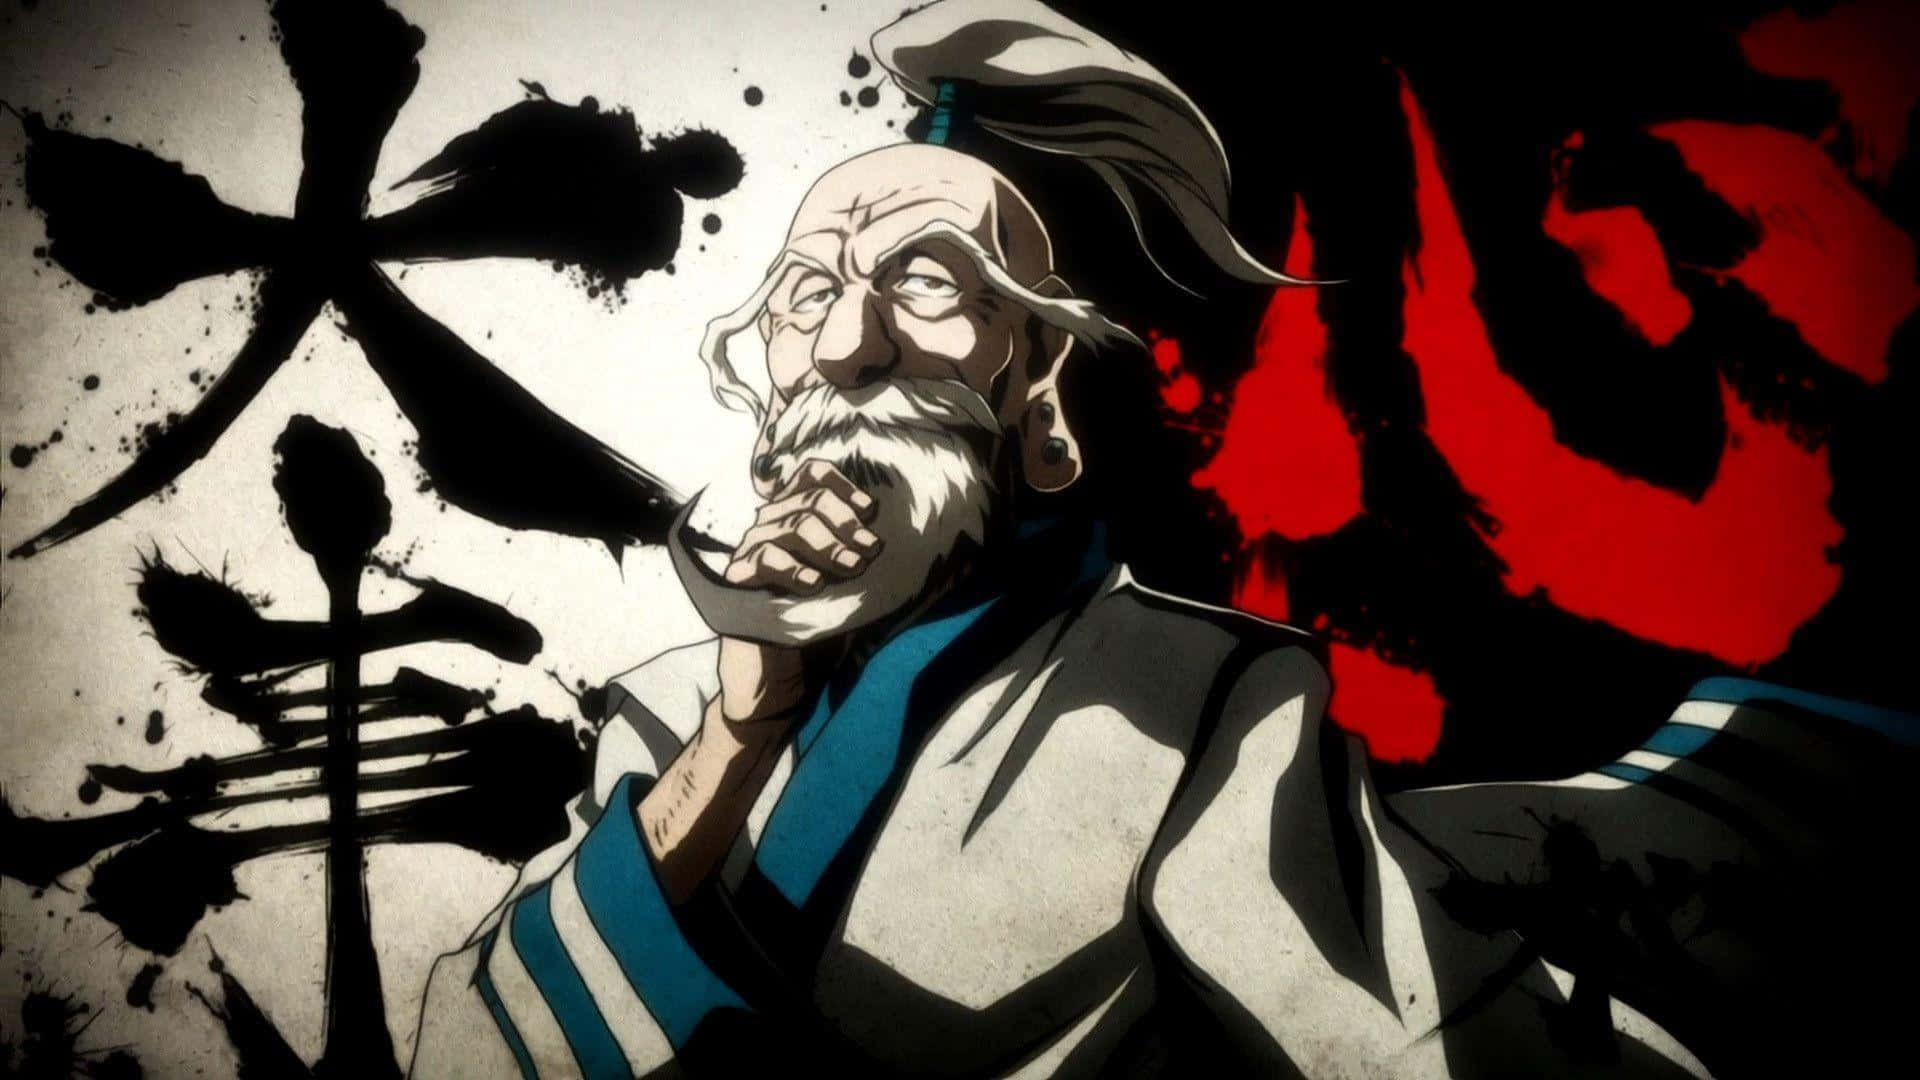 Mighty Isaac Netero unleashing his powerful technique Wallpaper